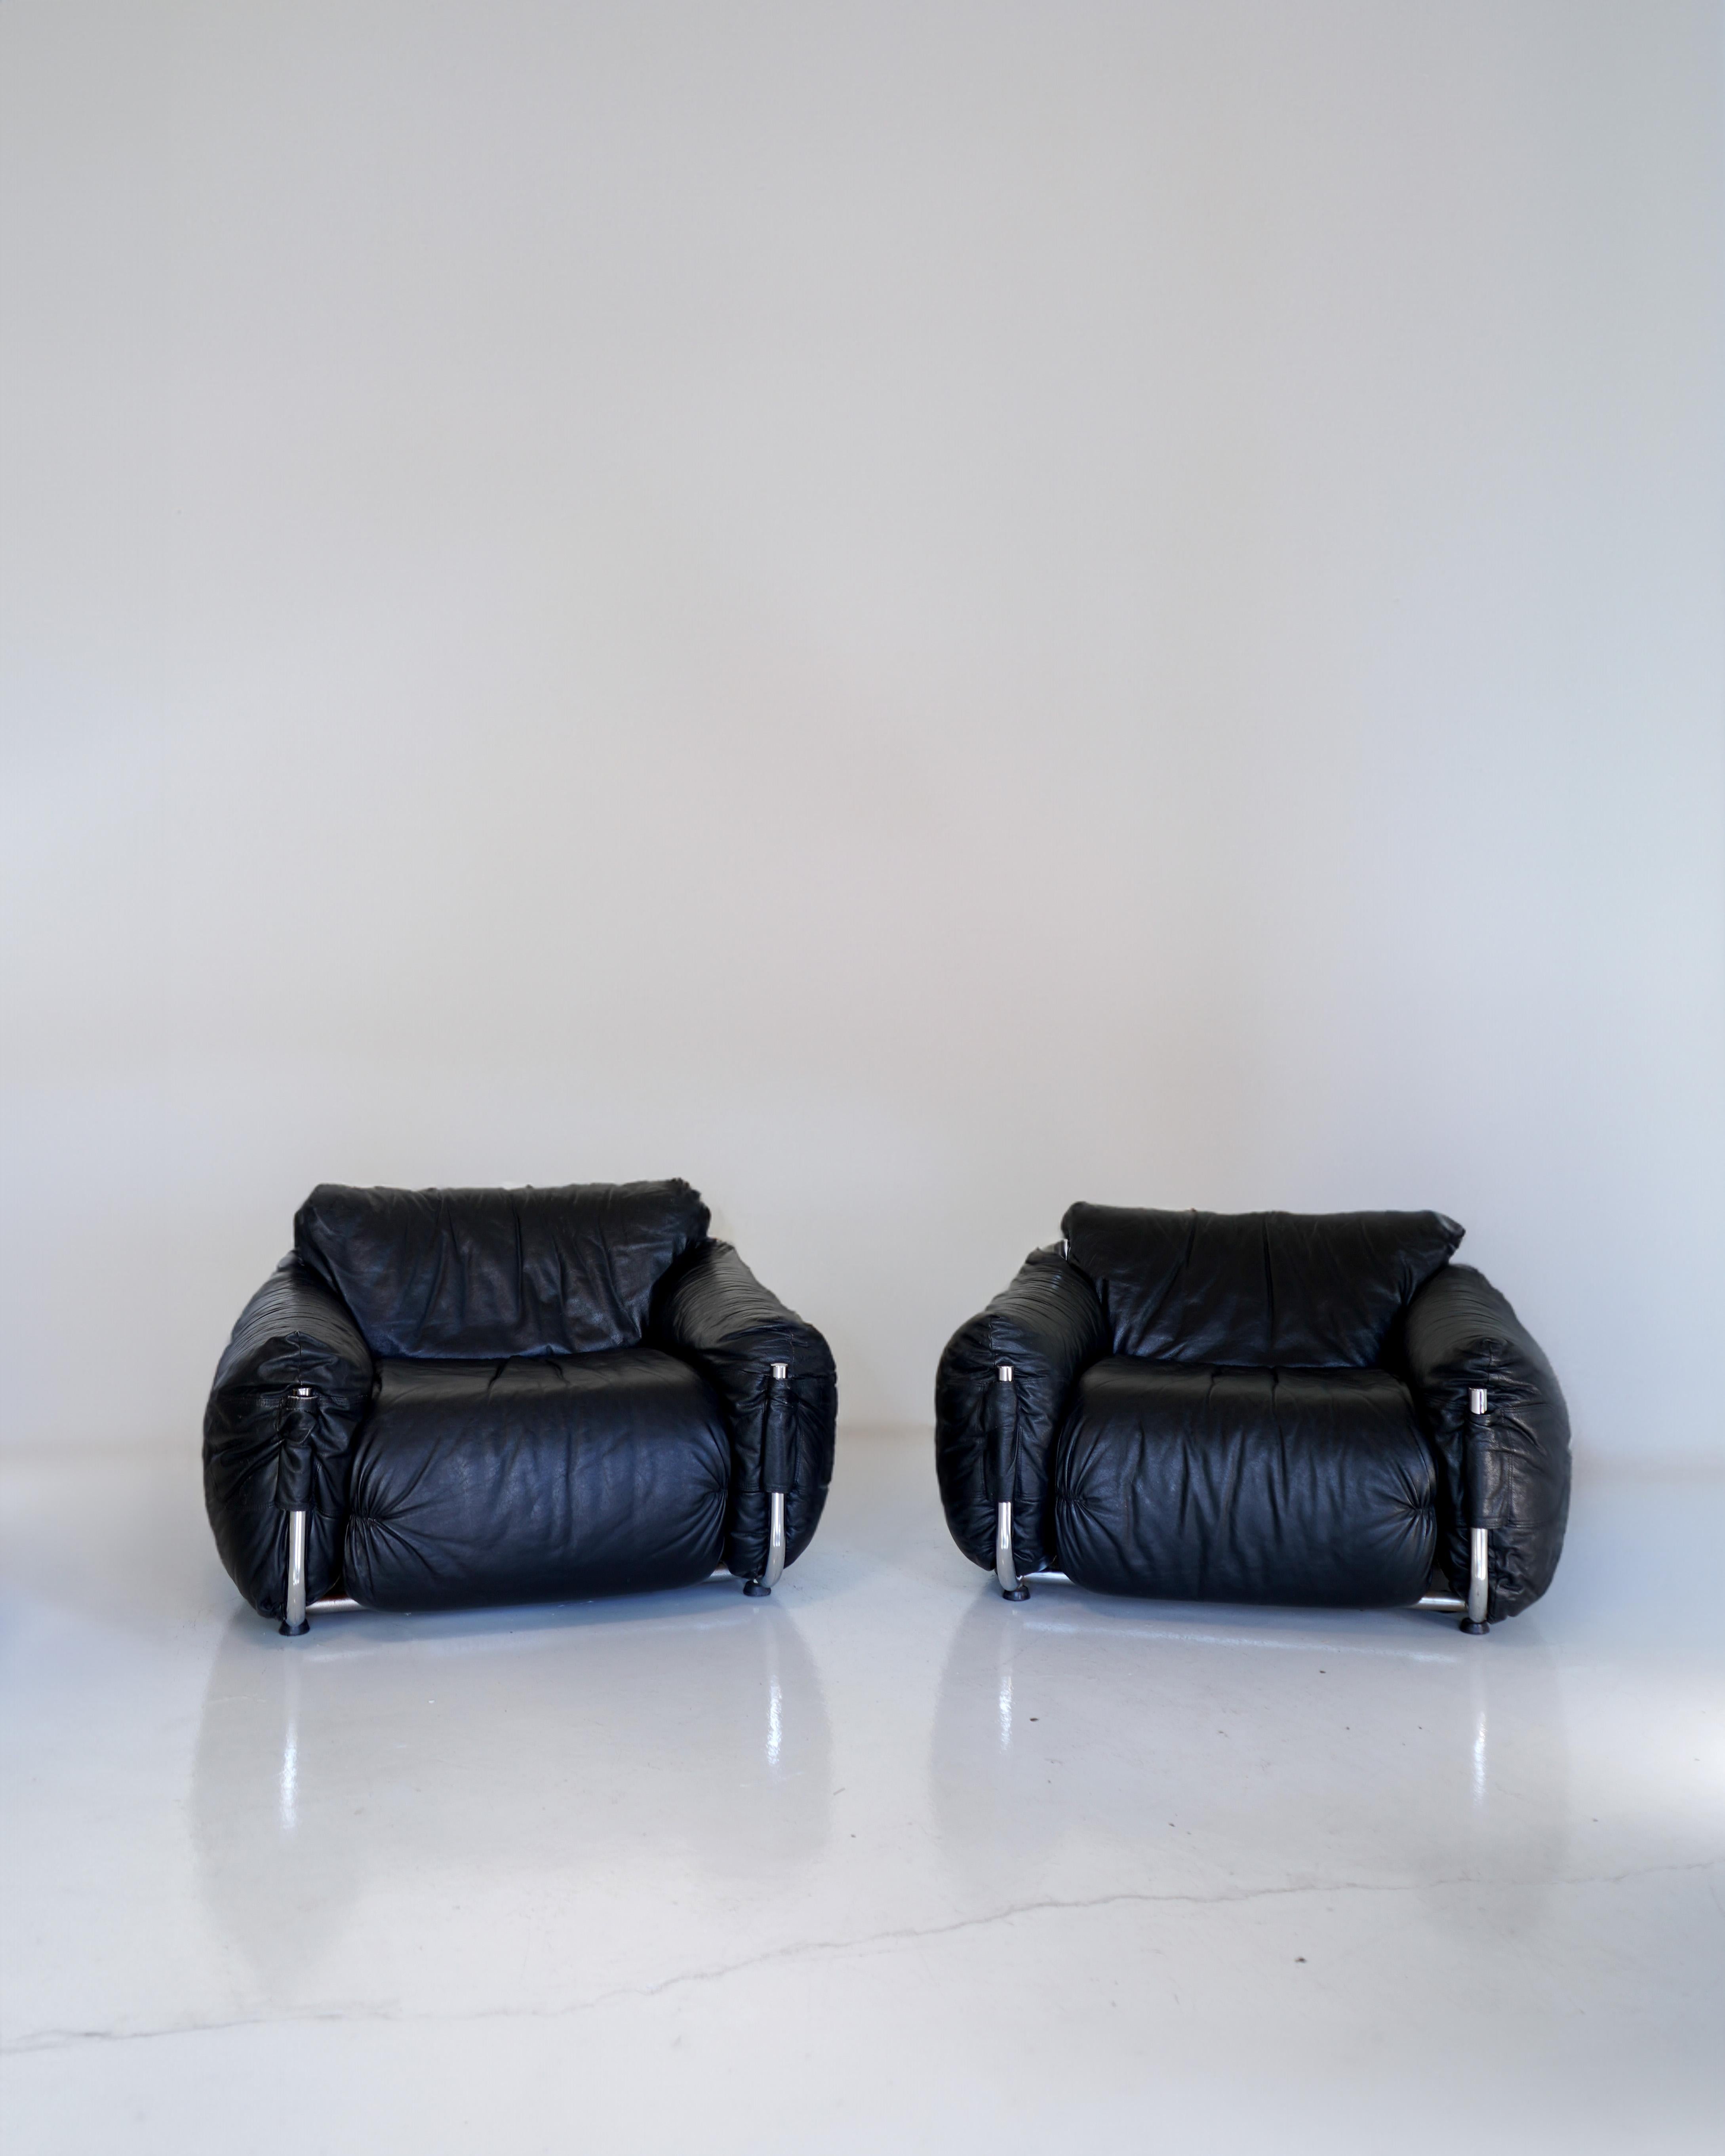 Striking Giuseppe Munari armchairs. Pillowy black leather cushions on a sleek frame of thick, tubular steel. A perfect blend of style and comfort, the sit is comfortable and supported without excessive sinking. Brilliant minimalist design, the